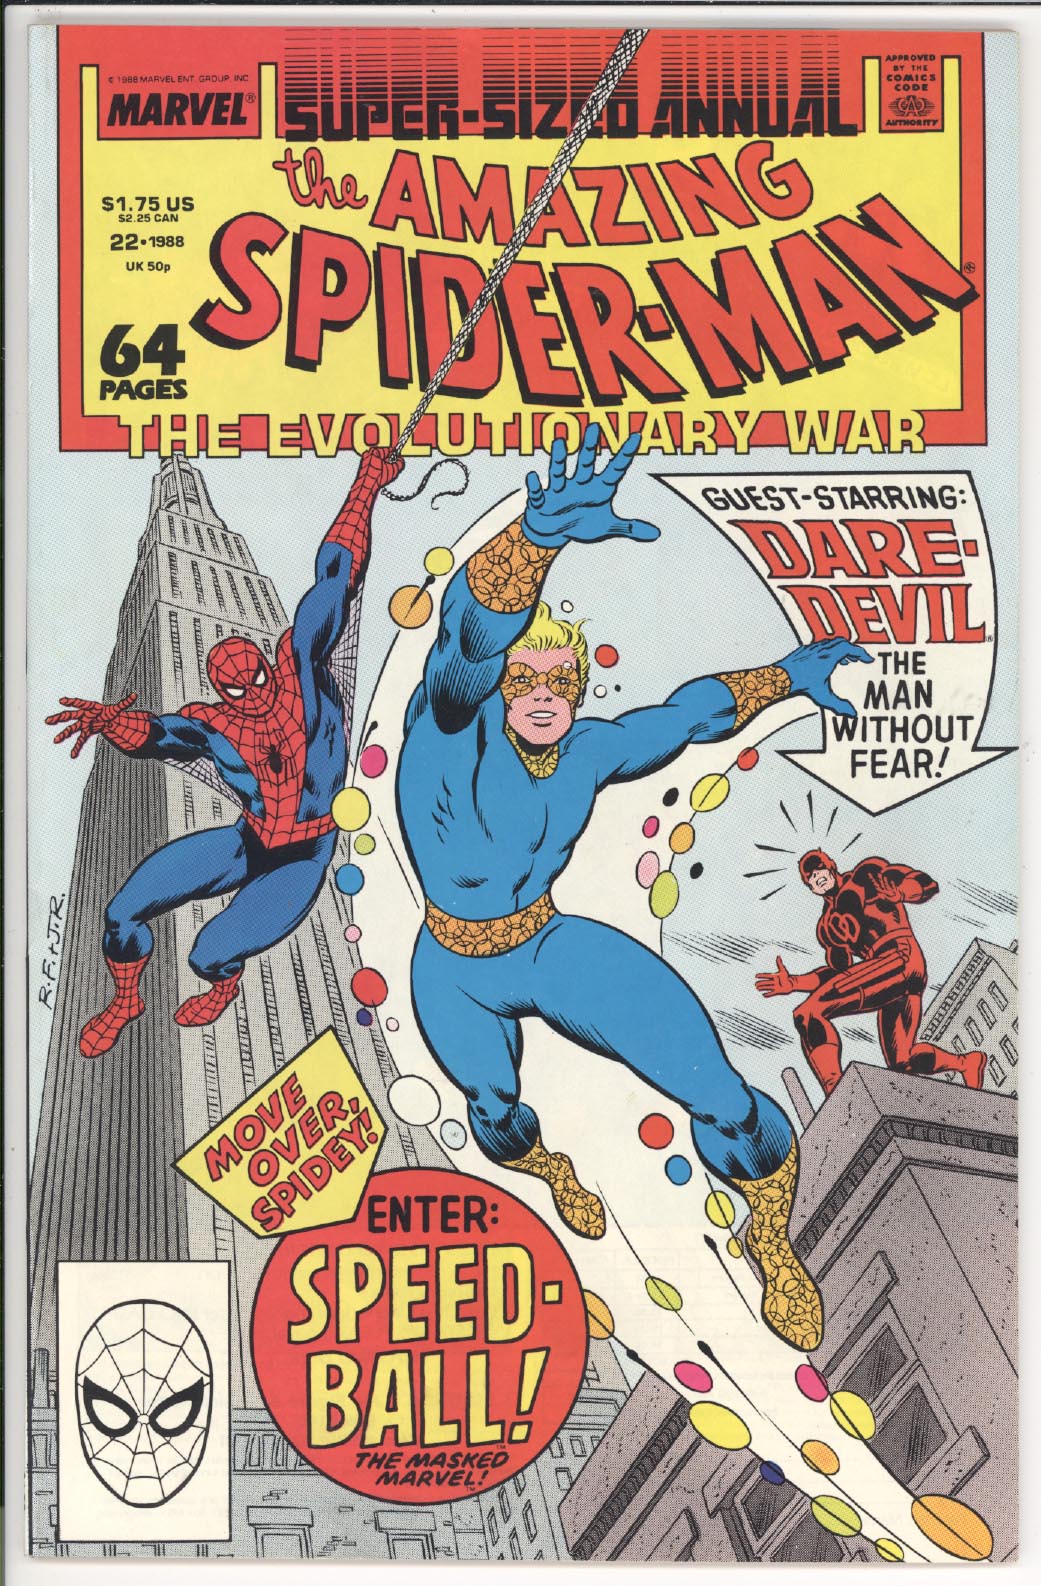 Amazing Spider-Man Annual #22 front